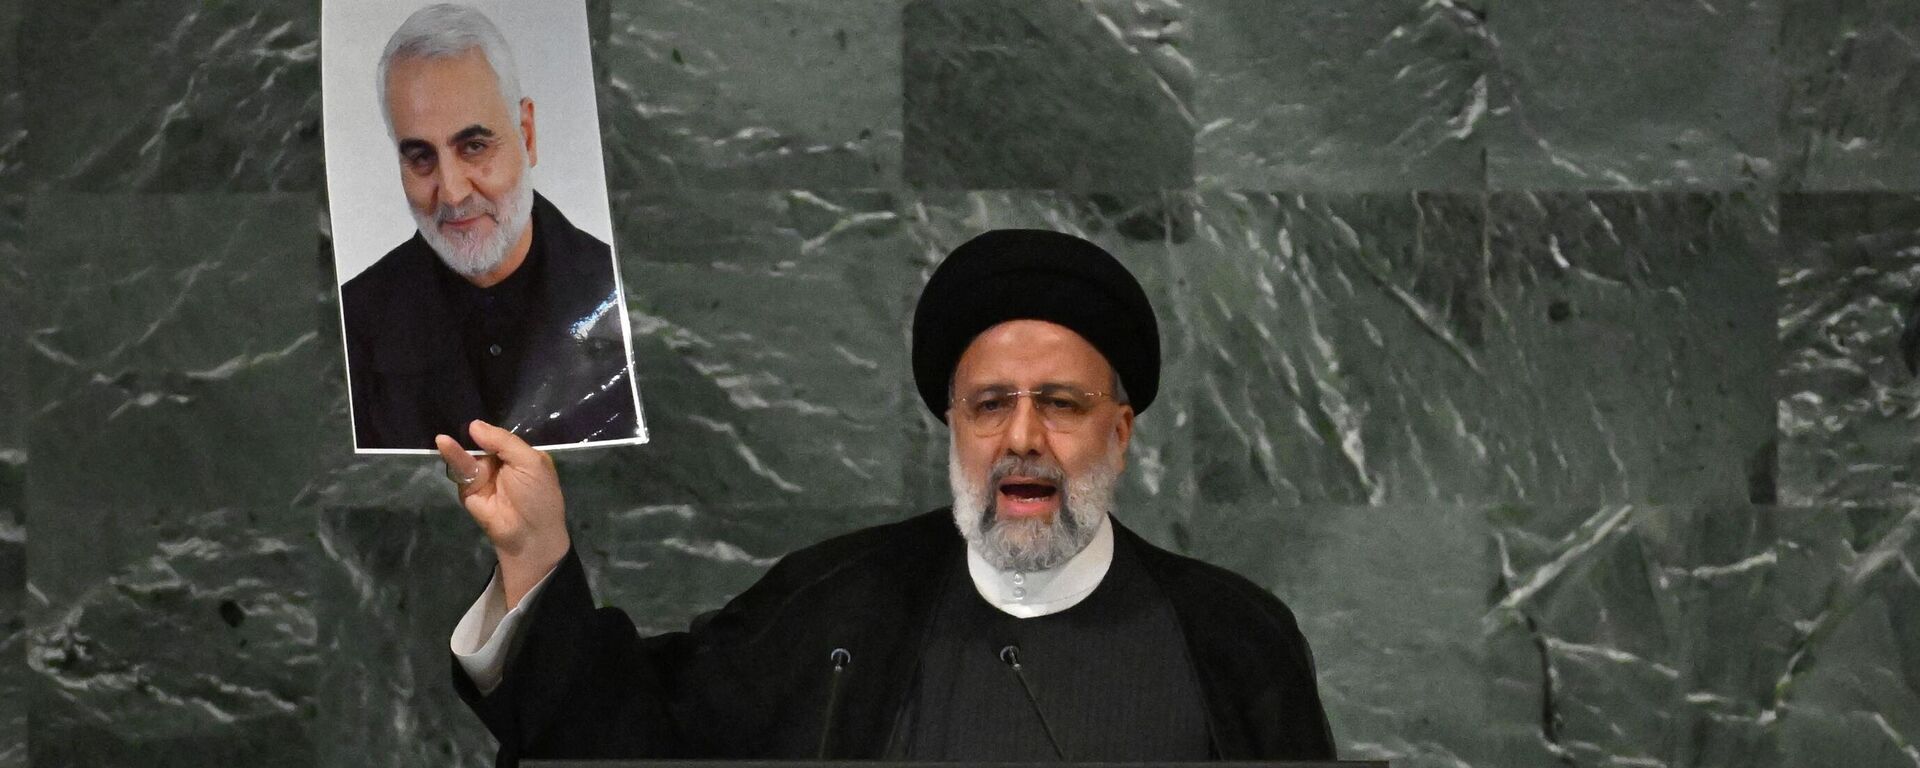 Iranian President Ebrahim Raisi addresses the 77th session of the United Nations General Assembly at the UN headquarters in New York City on September 21, 2022, while holding a photo of Iranian General Qasem Soleimani killed by a US drone strike in Baghdad in January 2020. - Sputnik International, 1920, 21.09.2022